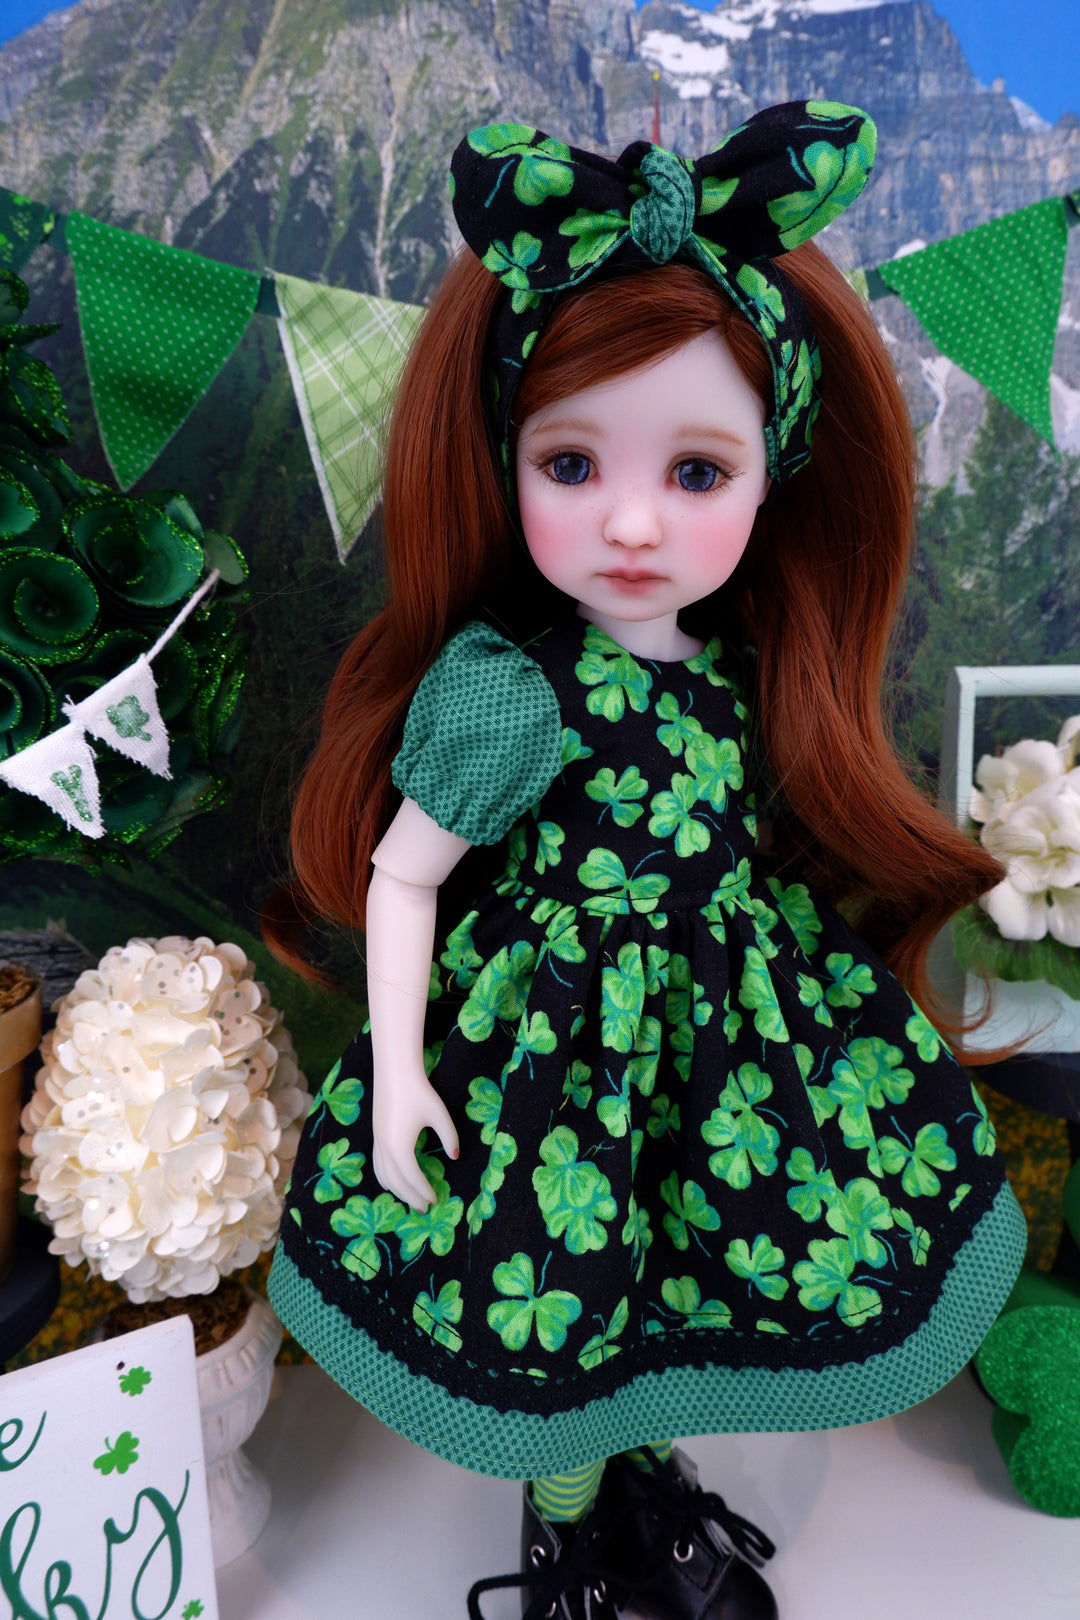 Clover Patch - dress and boots for Ruby Red Fashion Friends doll